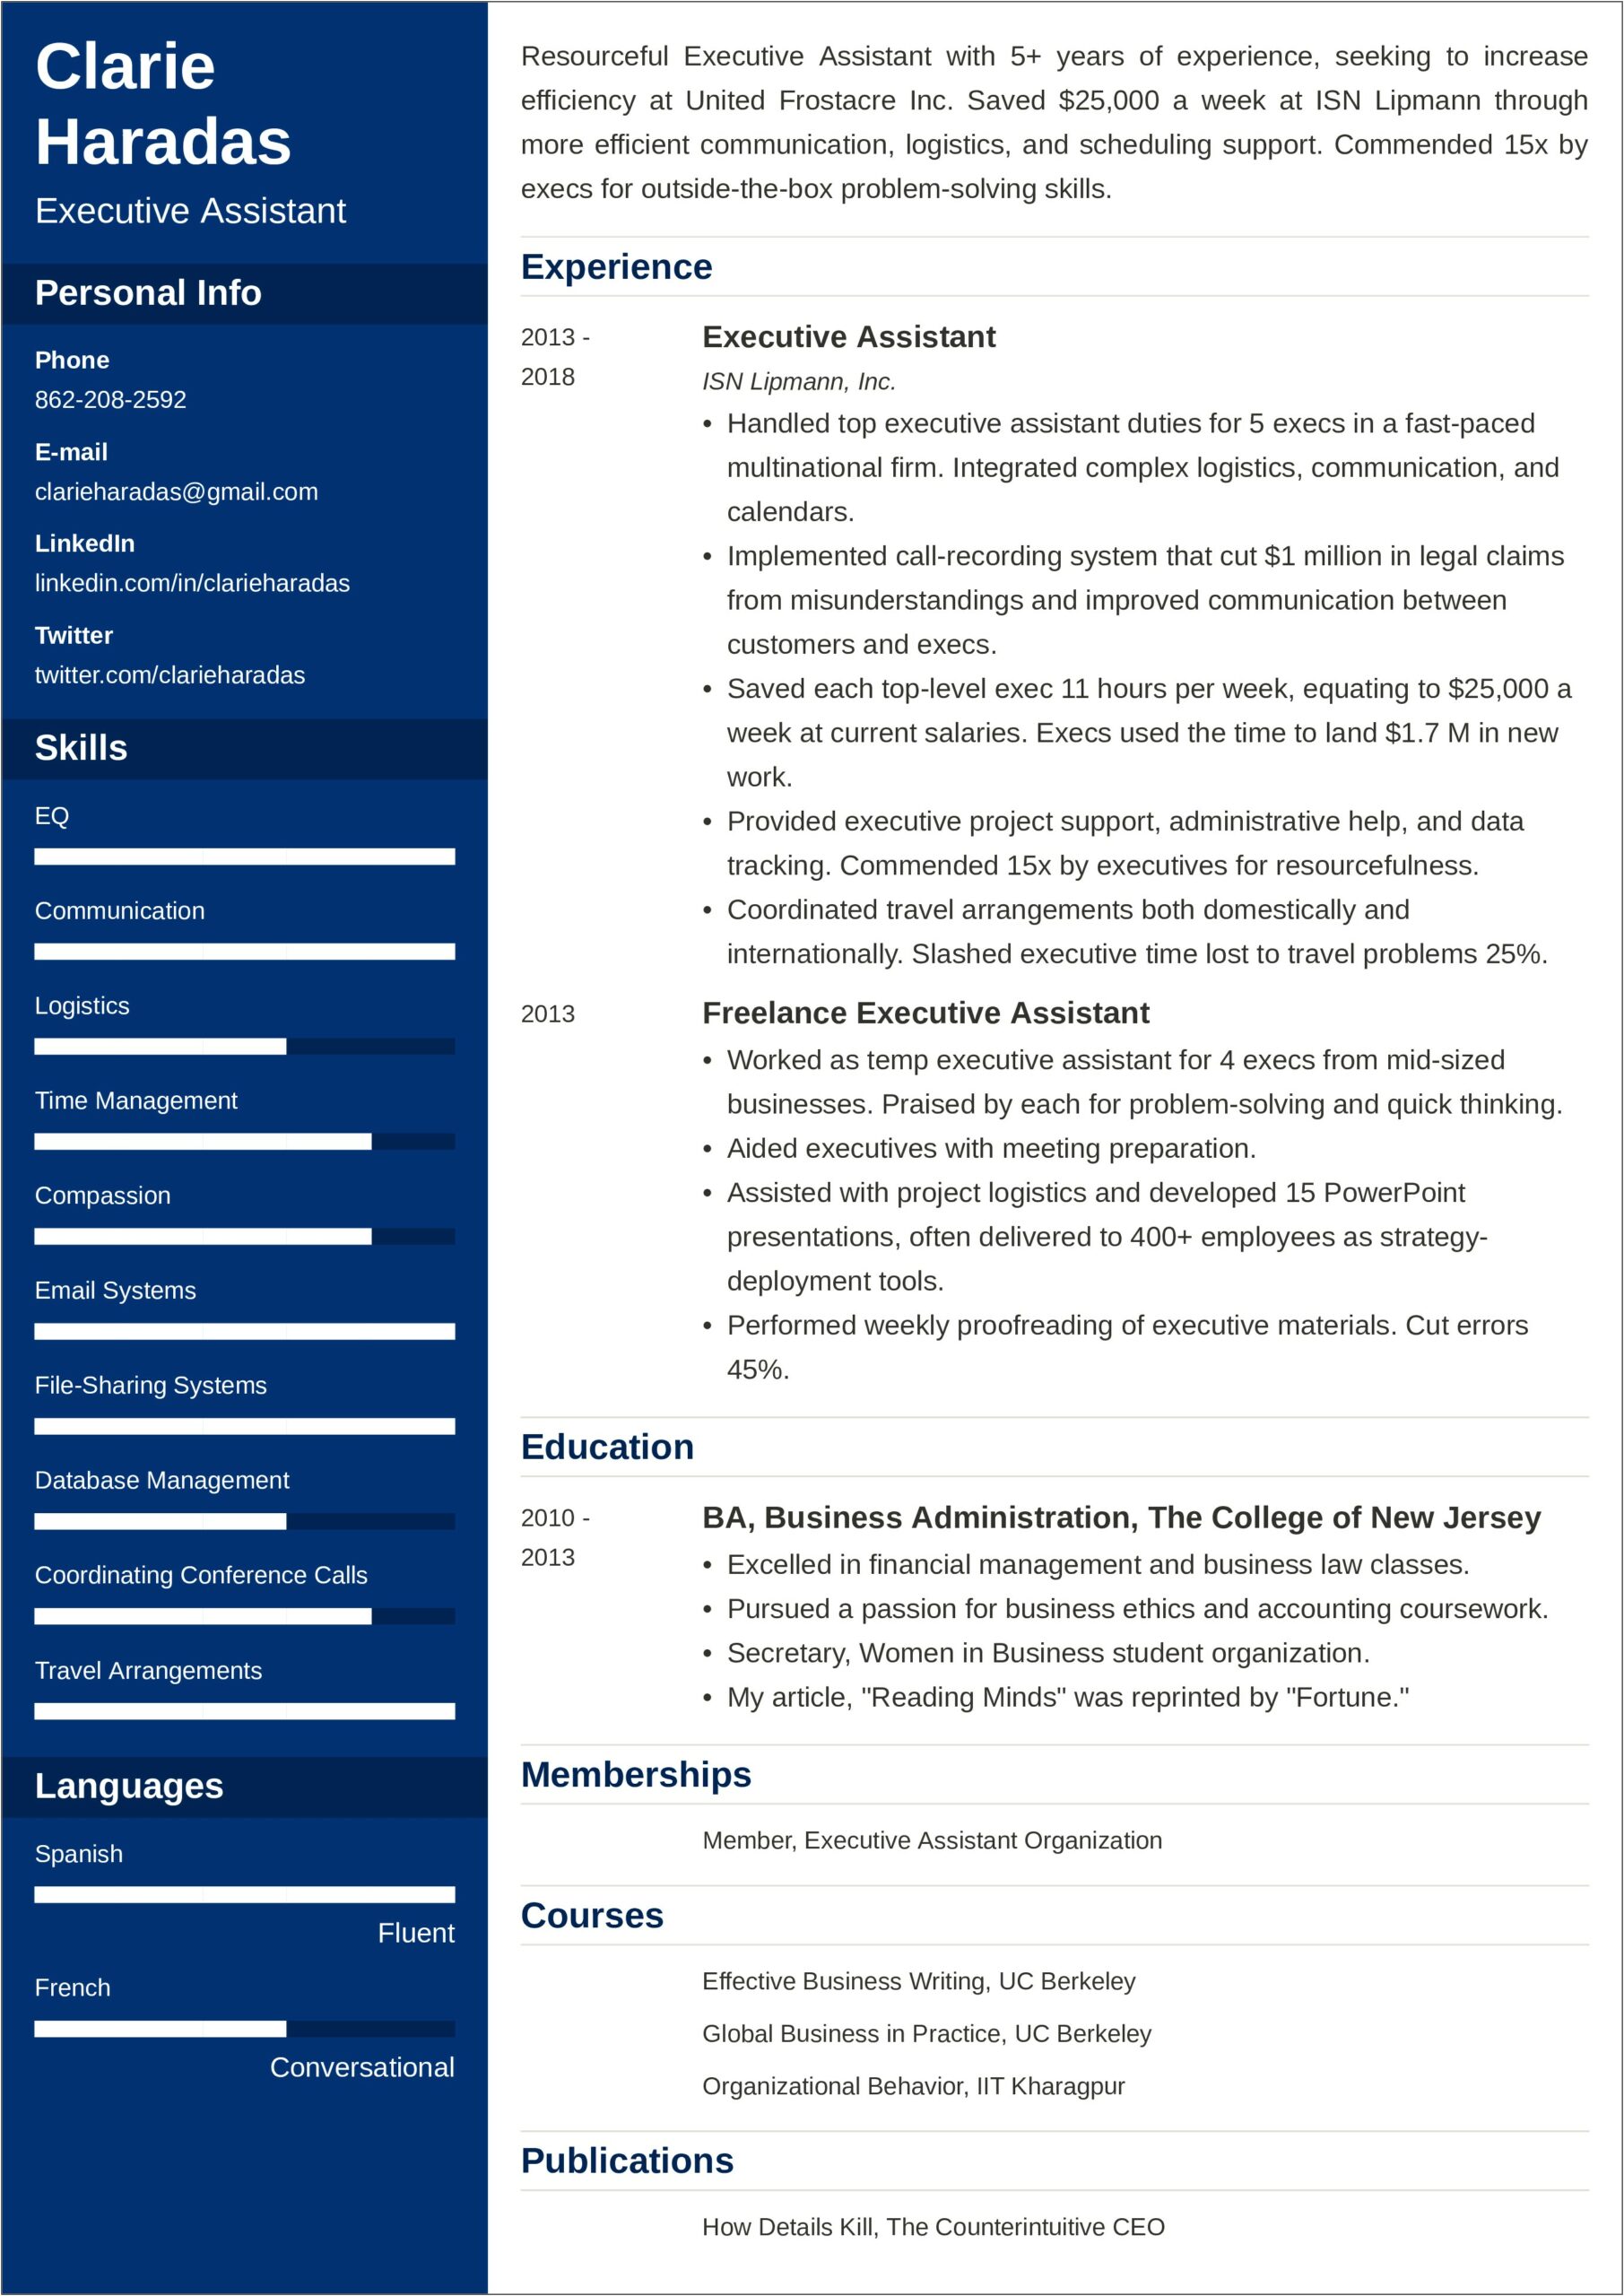 Resume Knowledge Skills And Abilities Section